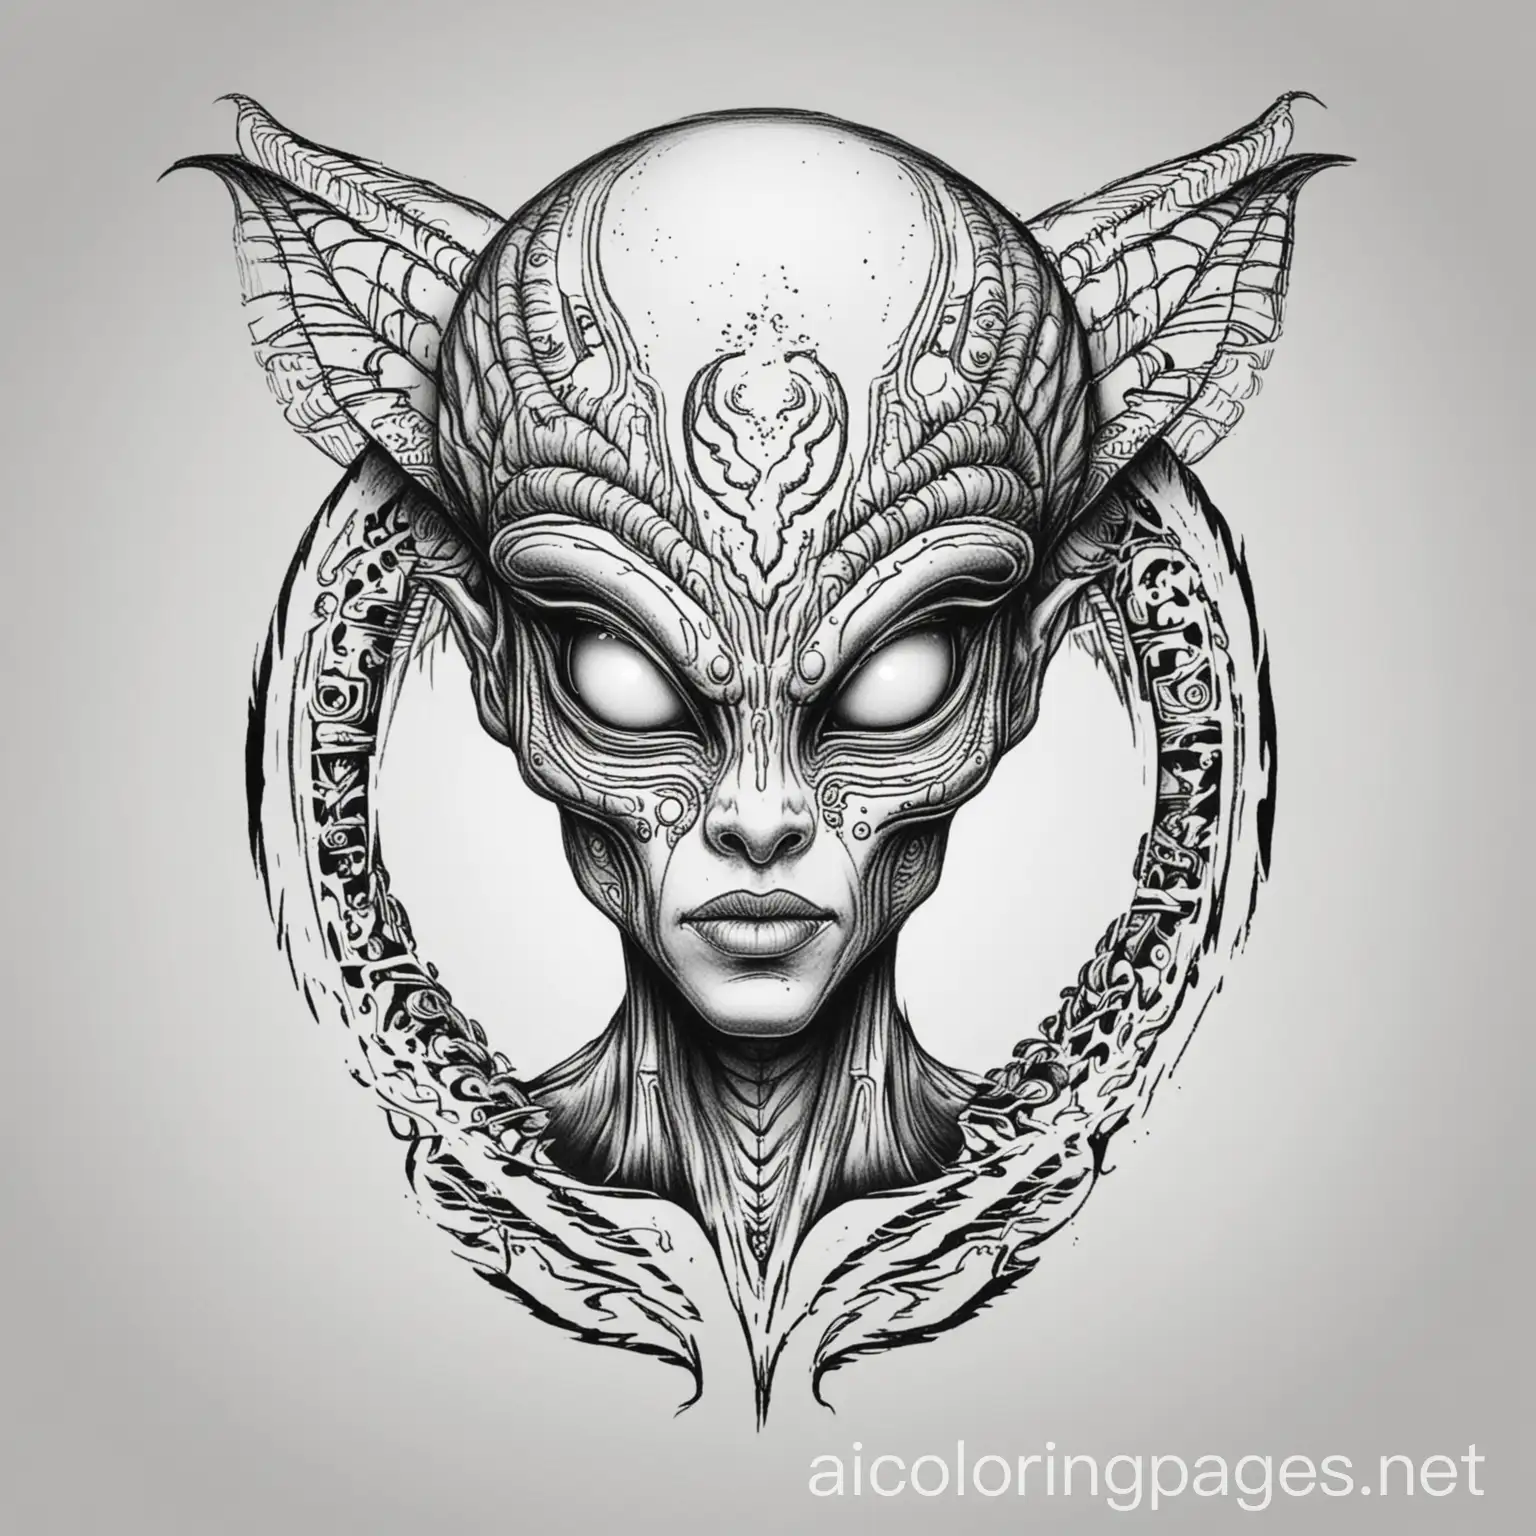 Simple-Alien-Tattoo-Vector-in-Coloring-Book-Style-on-White-Background